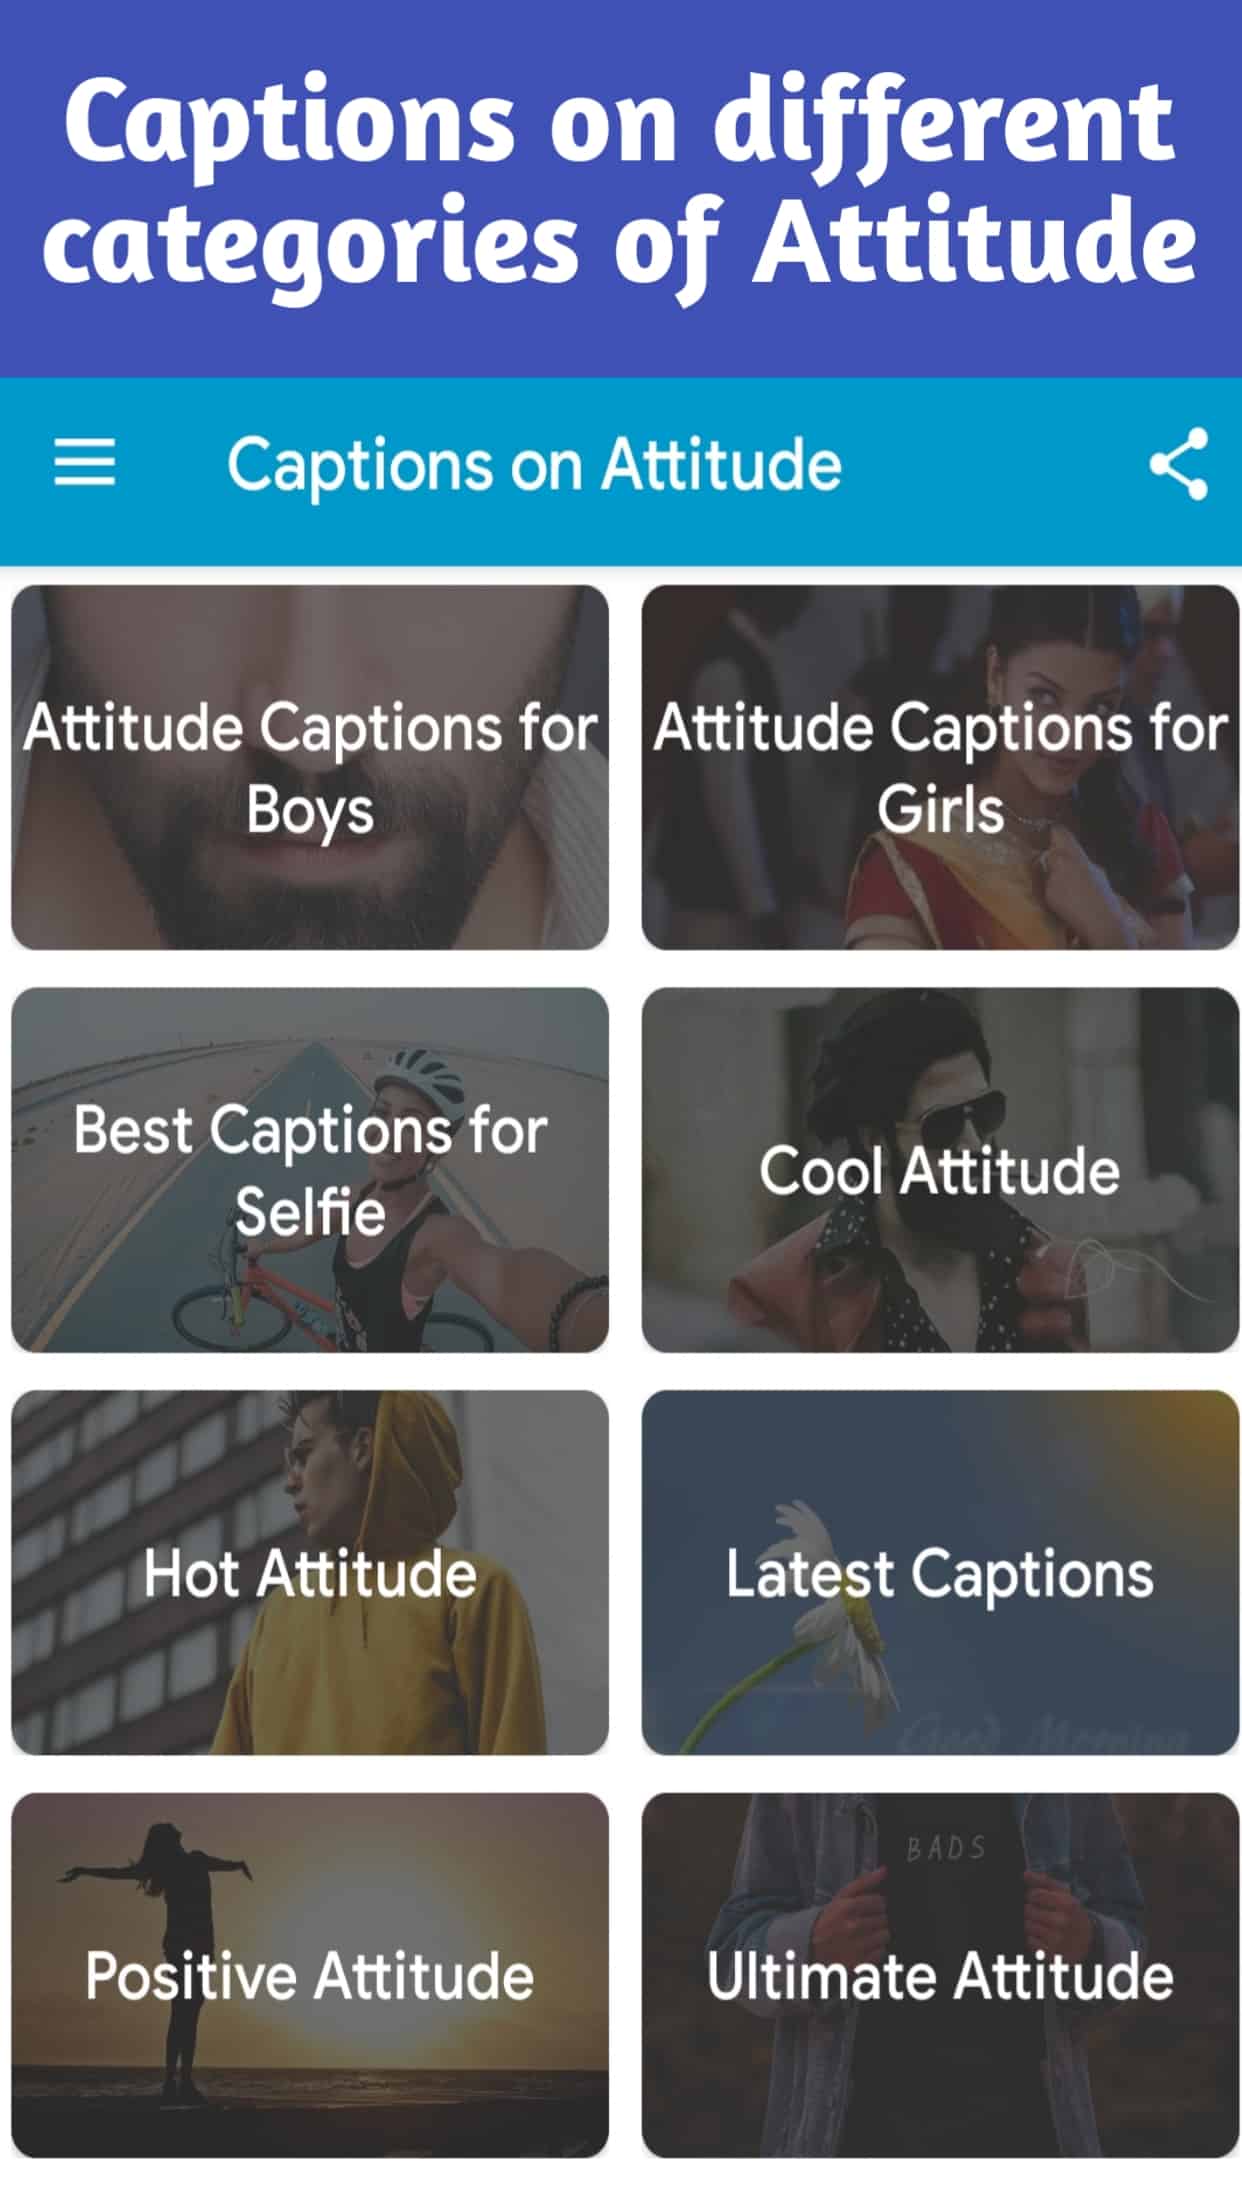 Best Captions on Attitude for Boys and Girls 2020